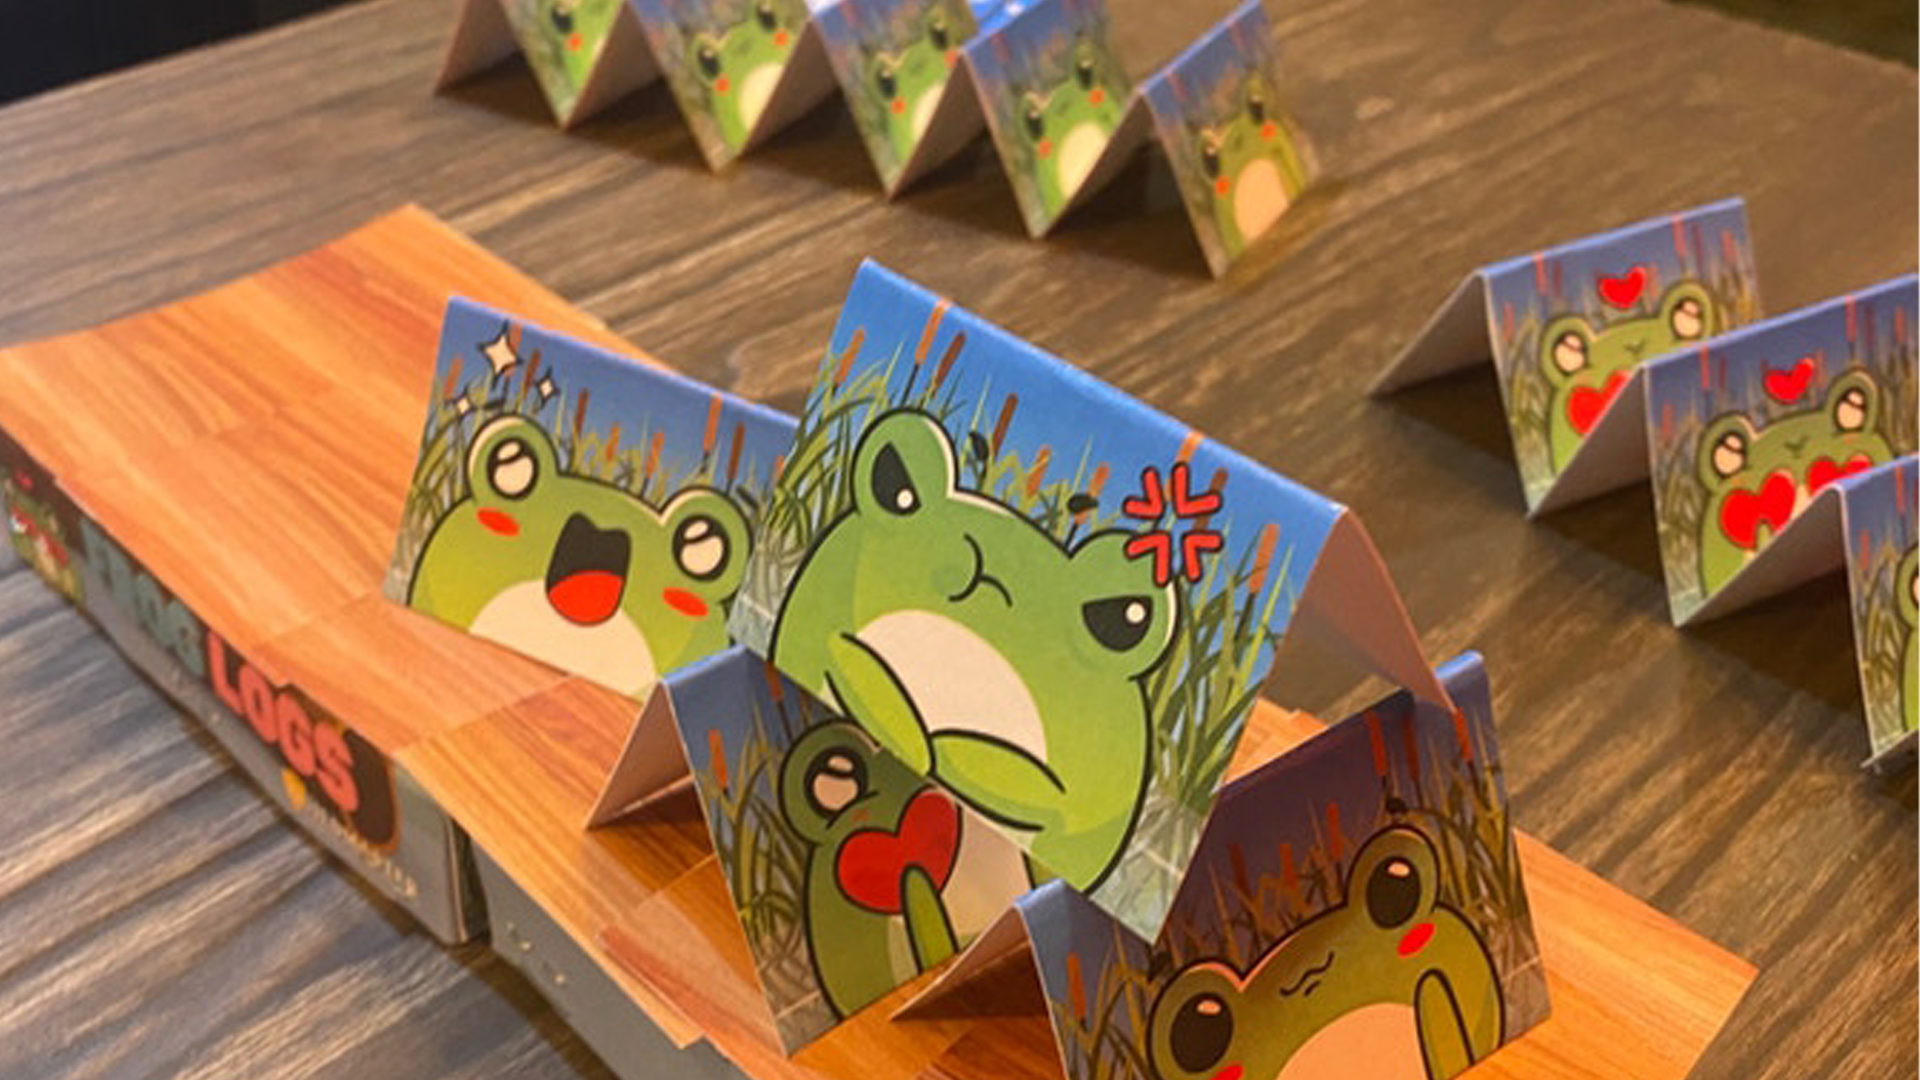 An image of the Frog Logs game being played.